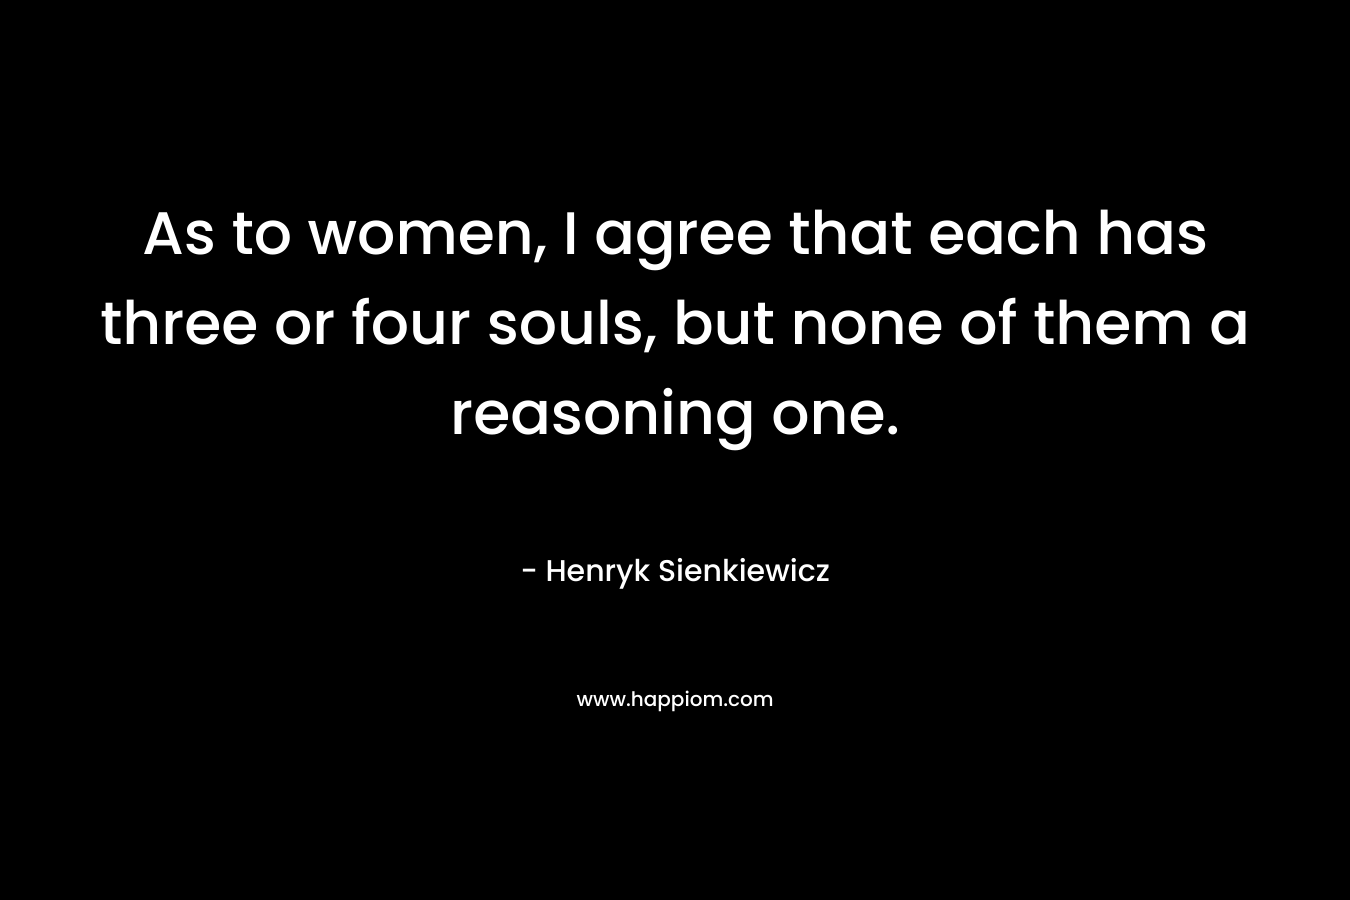 As to women, I agree that each has three or four souls, but none of them a reasoning one. – Henryk Sienkiewicz